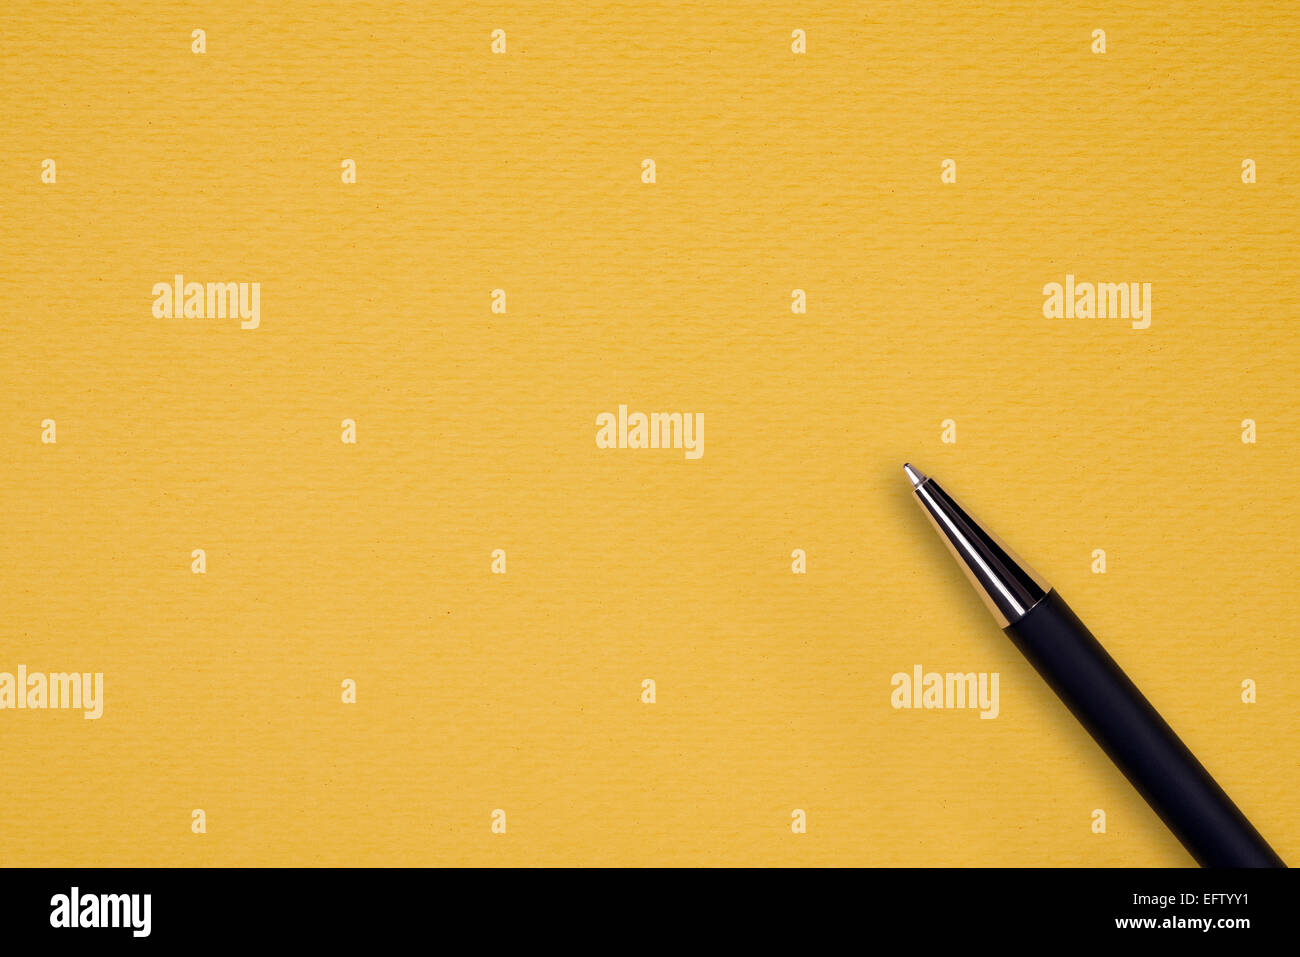 Yellow paper background with black ball pen and text space Stock Photo